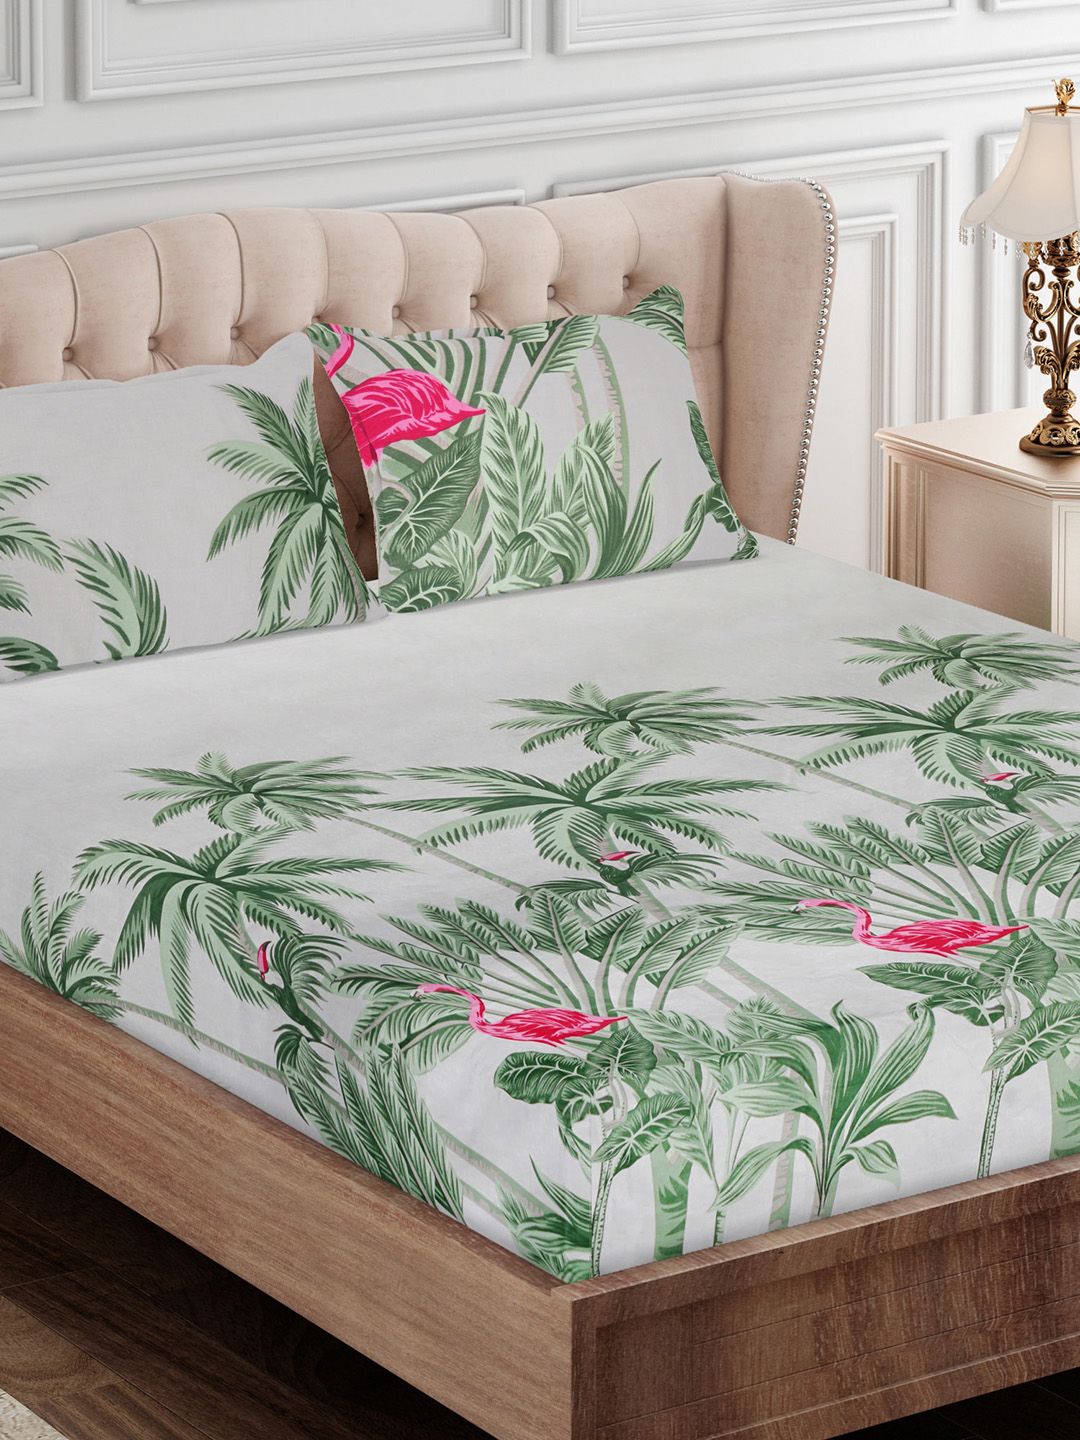 SEJ by Nisha Gupta Green & Pink Conversational 180 TC King Bedsheet with 2 Pillow Covers Price in India